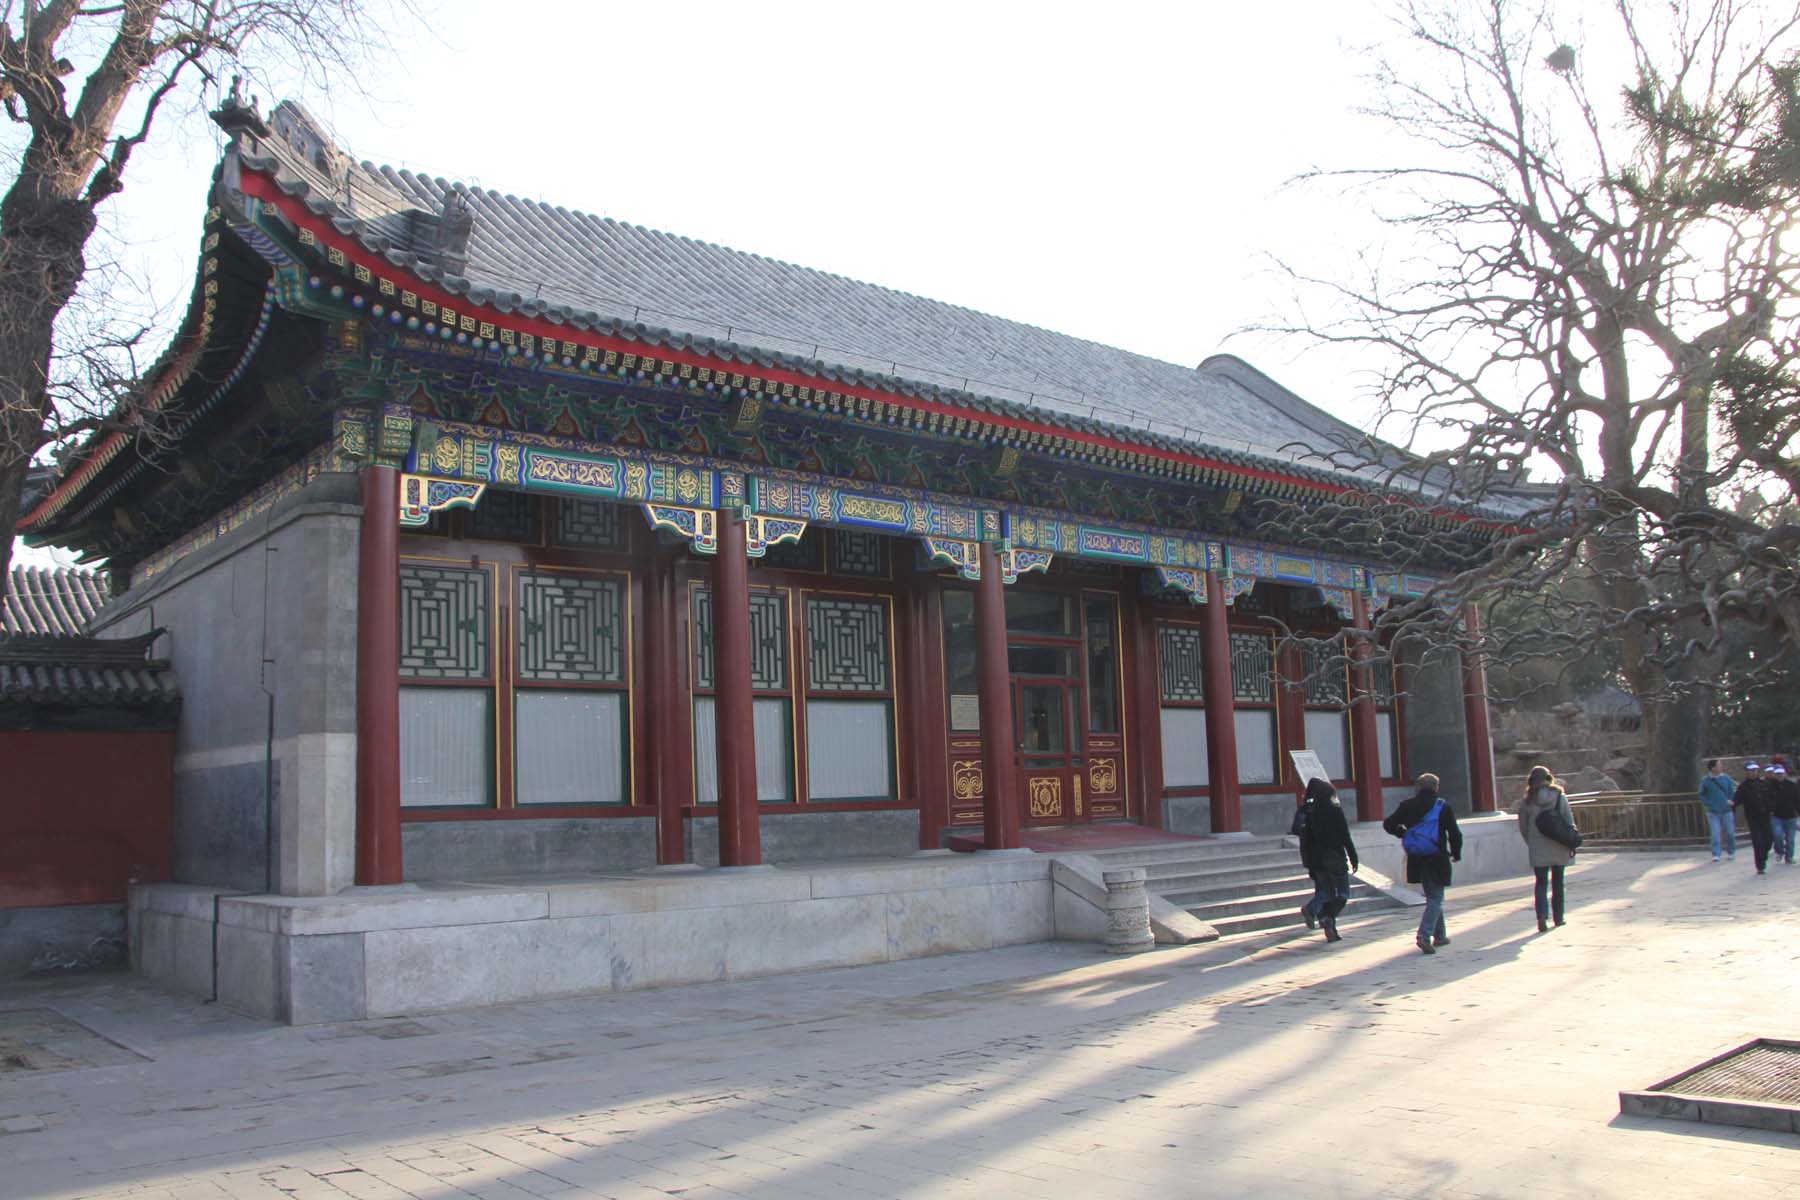 Beside the Hall of Benevolence and Longevity, was this smaller pavilion.